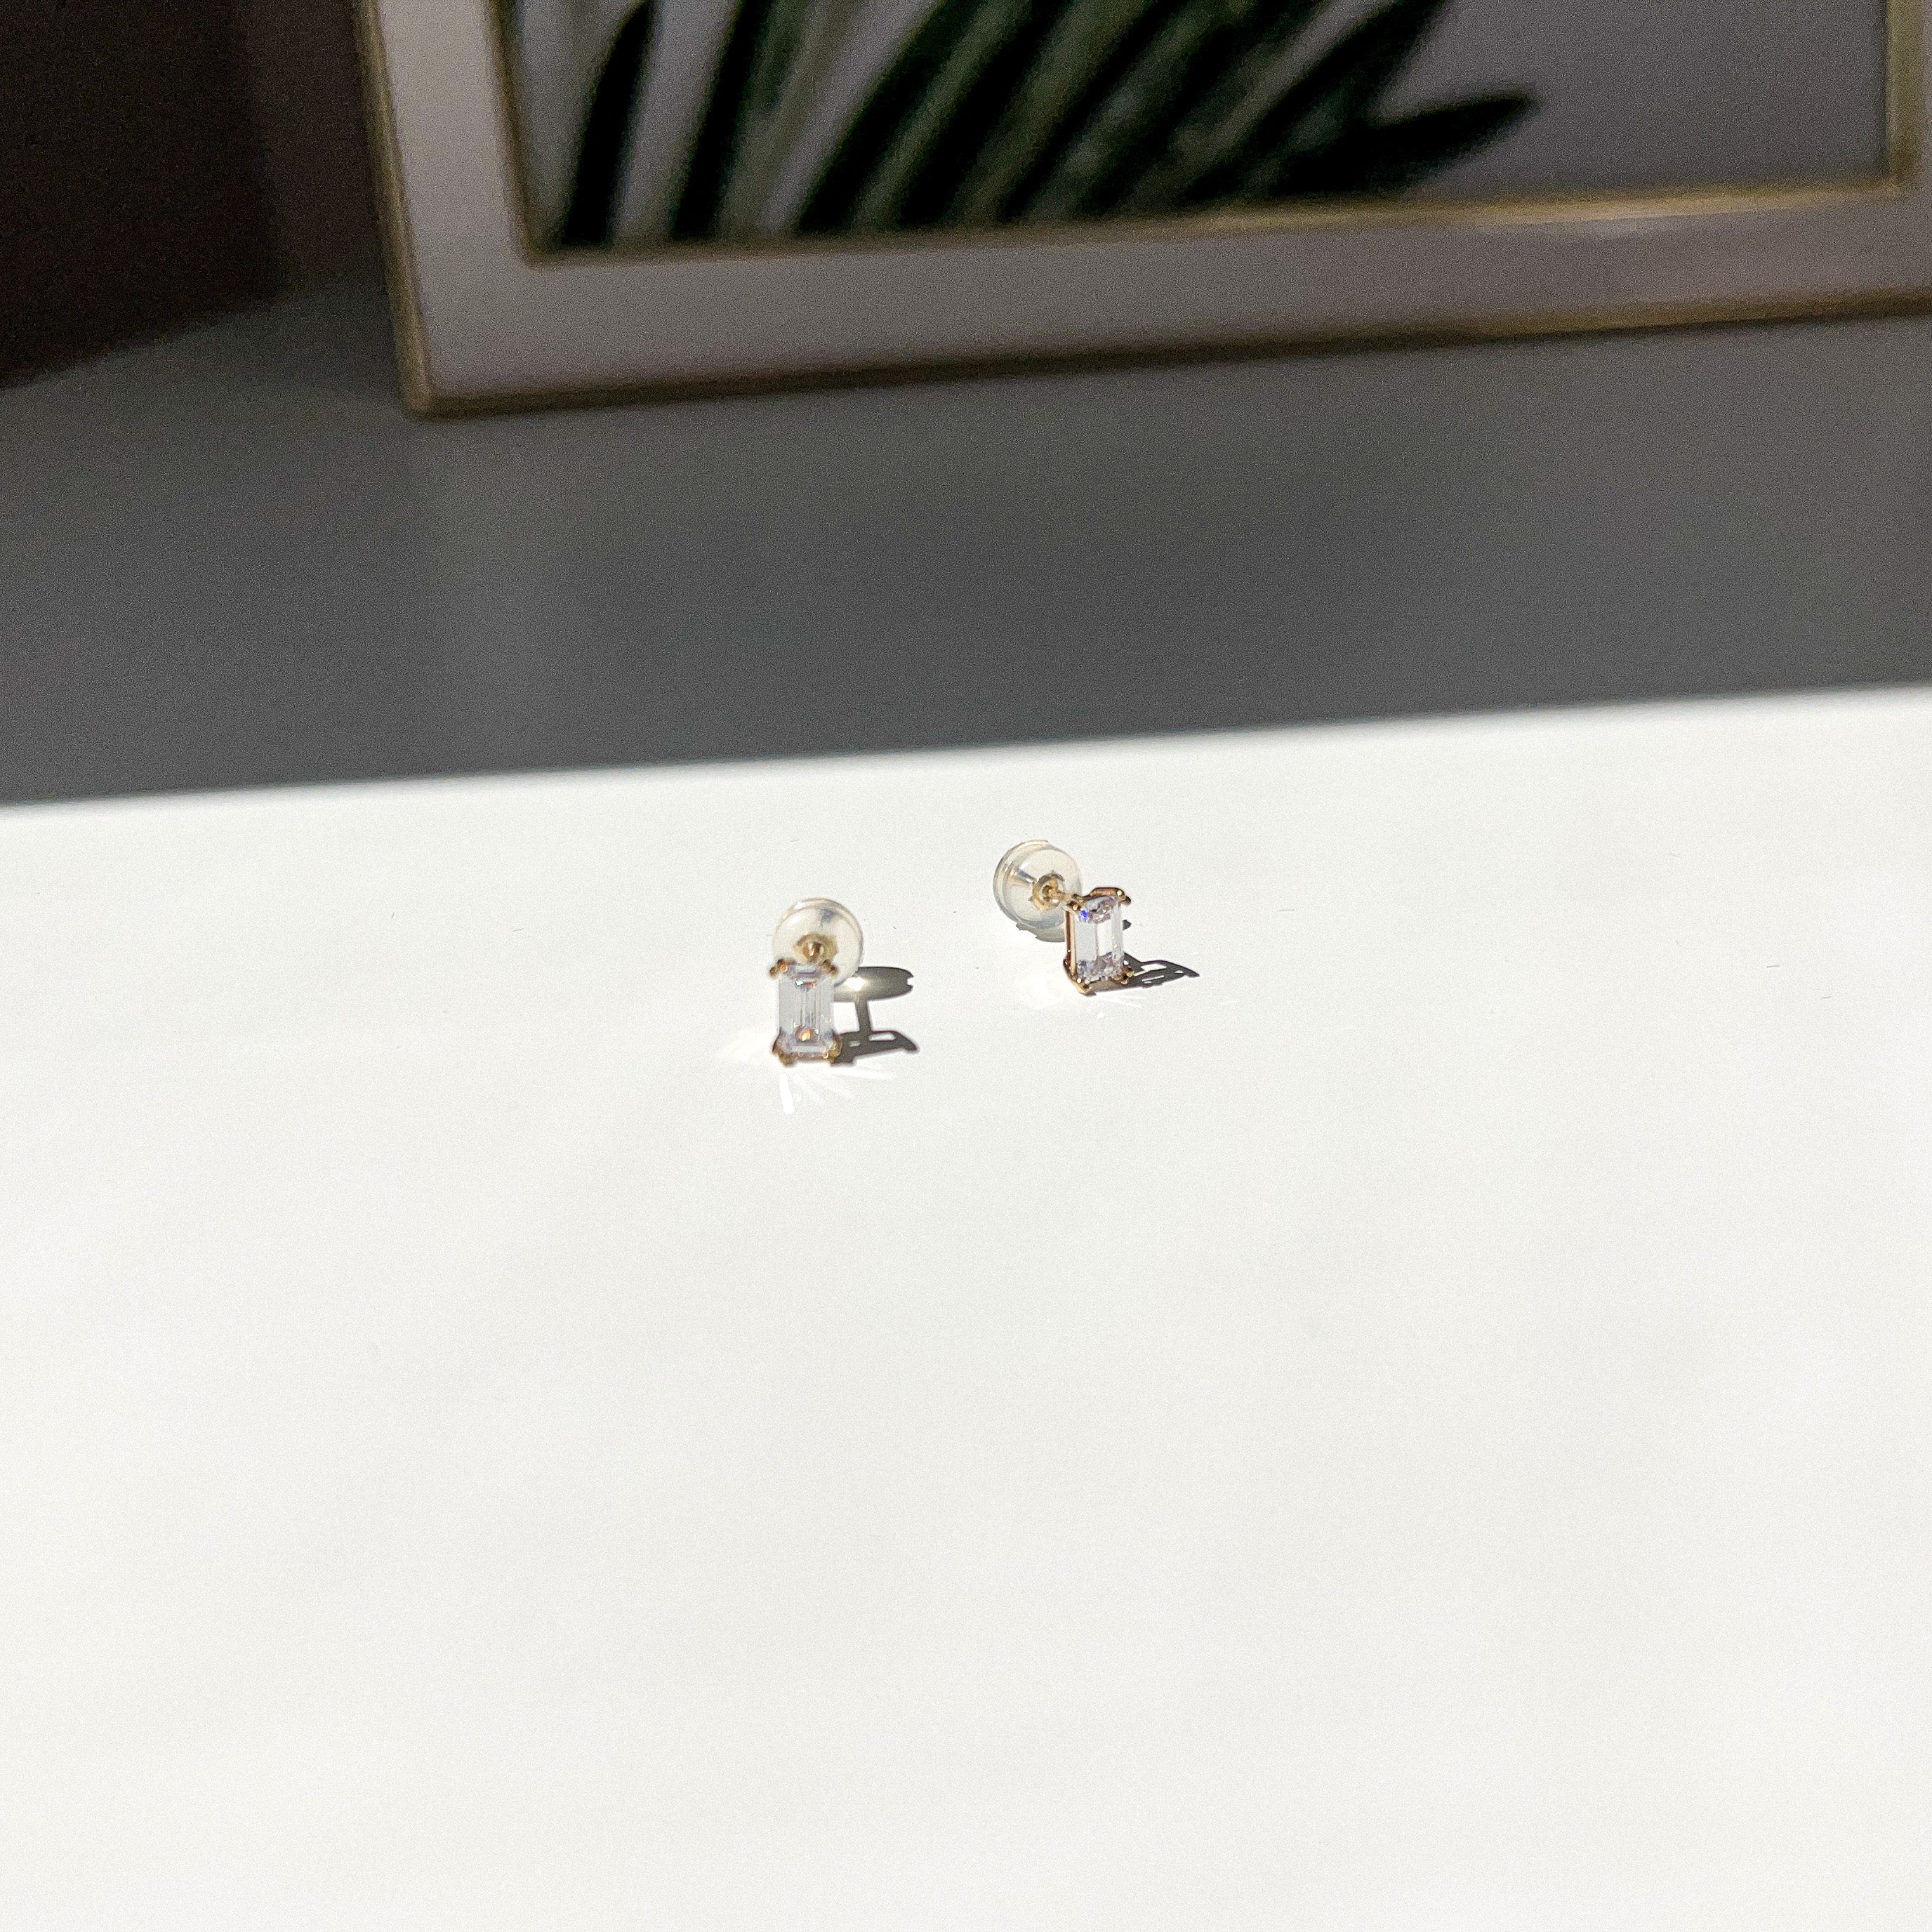 Solid 14k Gold - Miniature Simply Stunning Studs